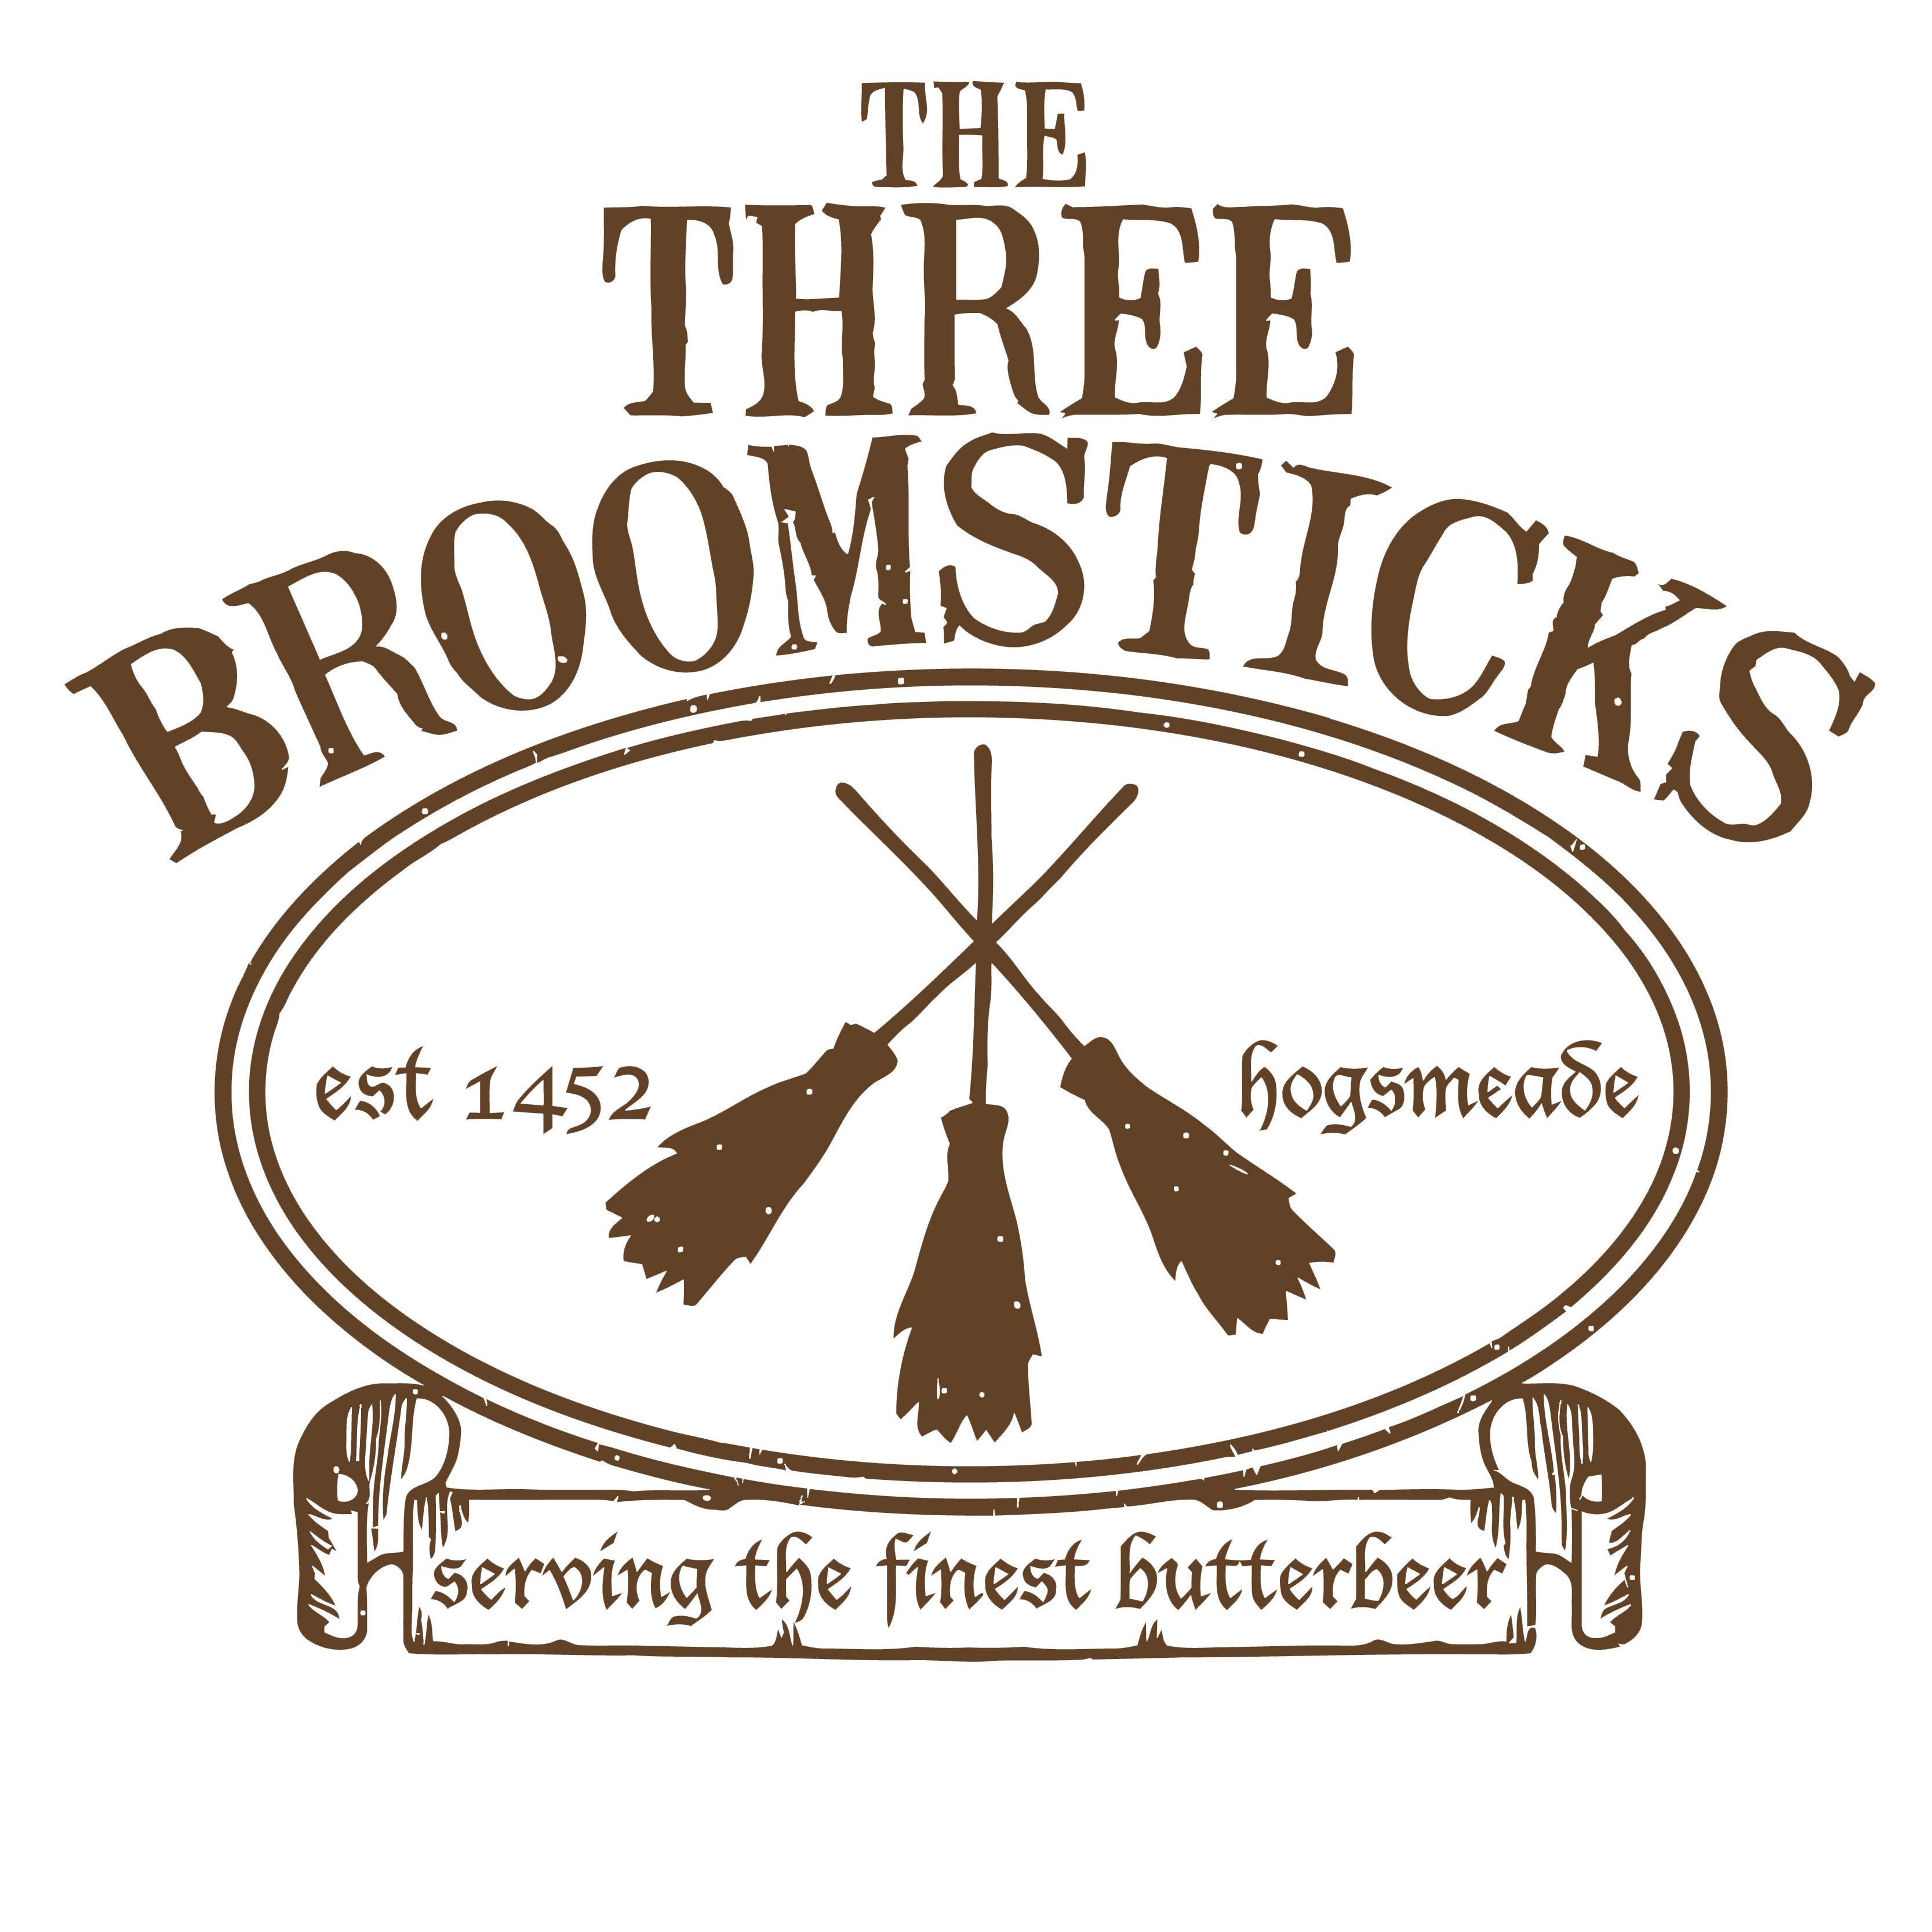 The Three Broomsticks Logo (from Harry Potter) Huge, High-Resolution